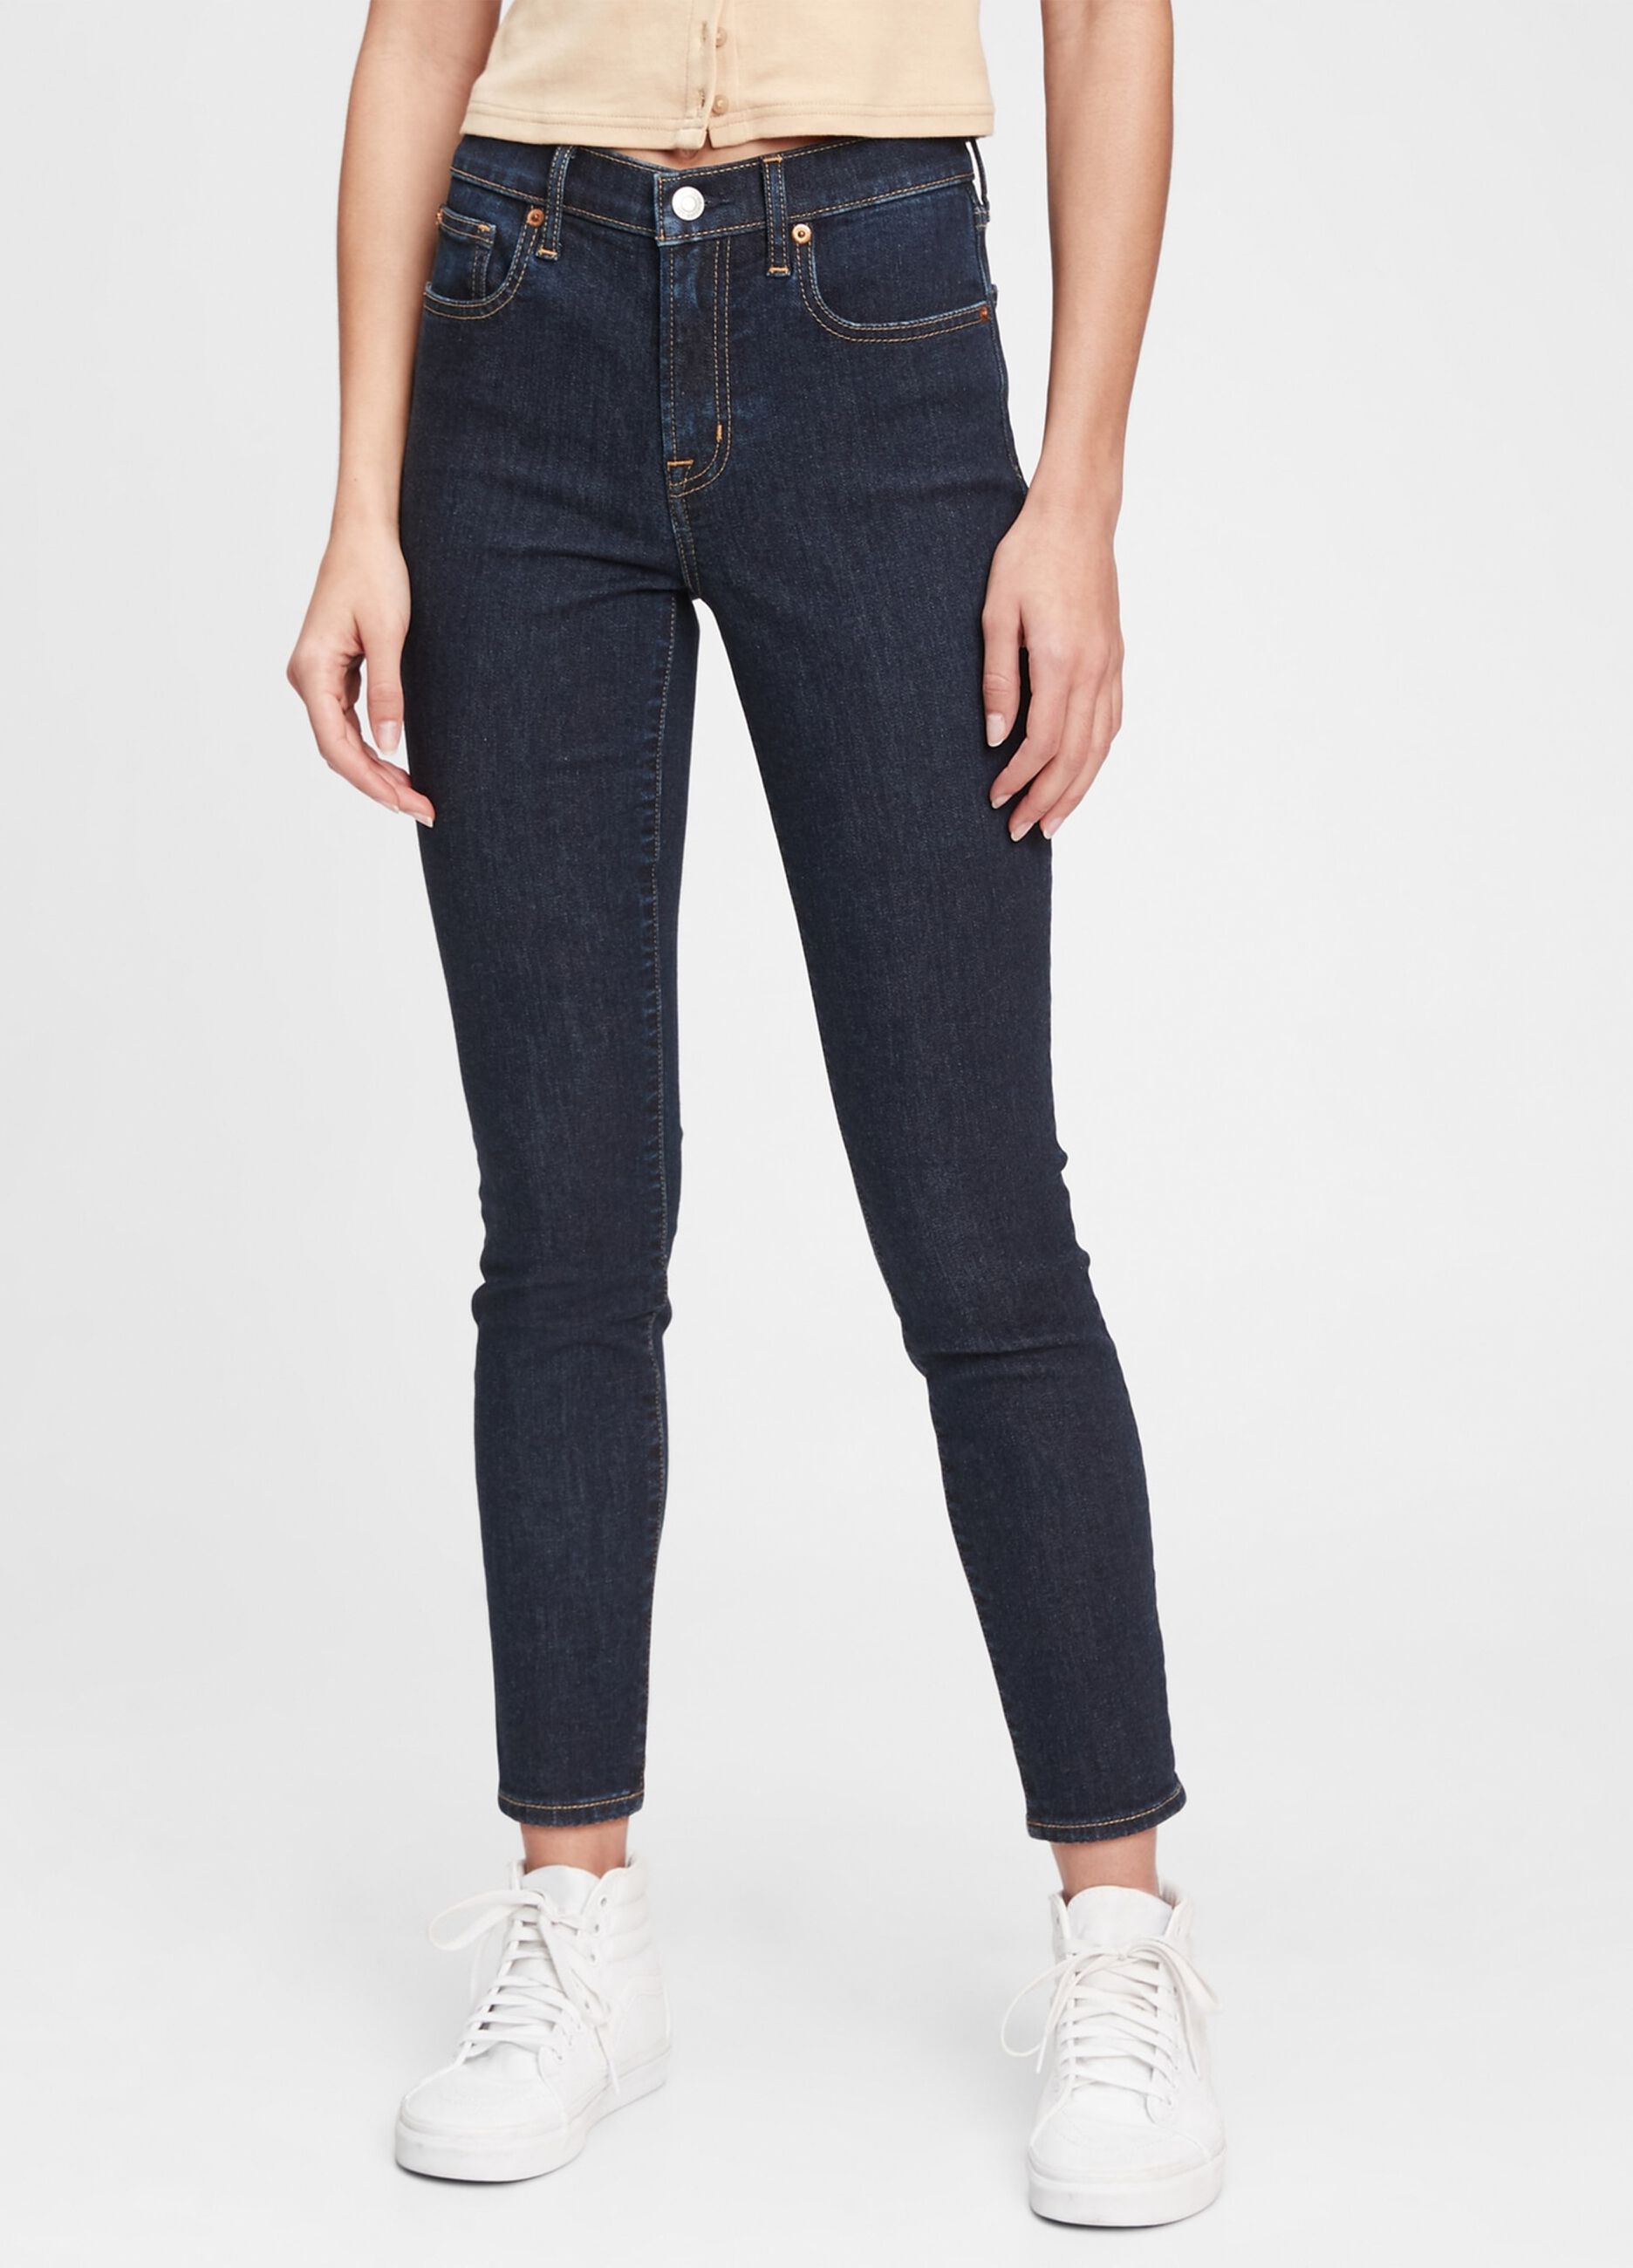 Mid-rise, skinny-fit jeans